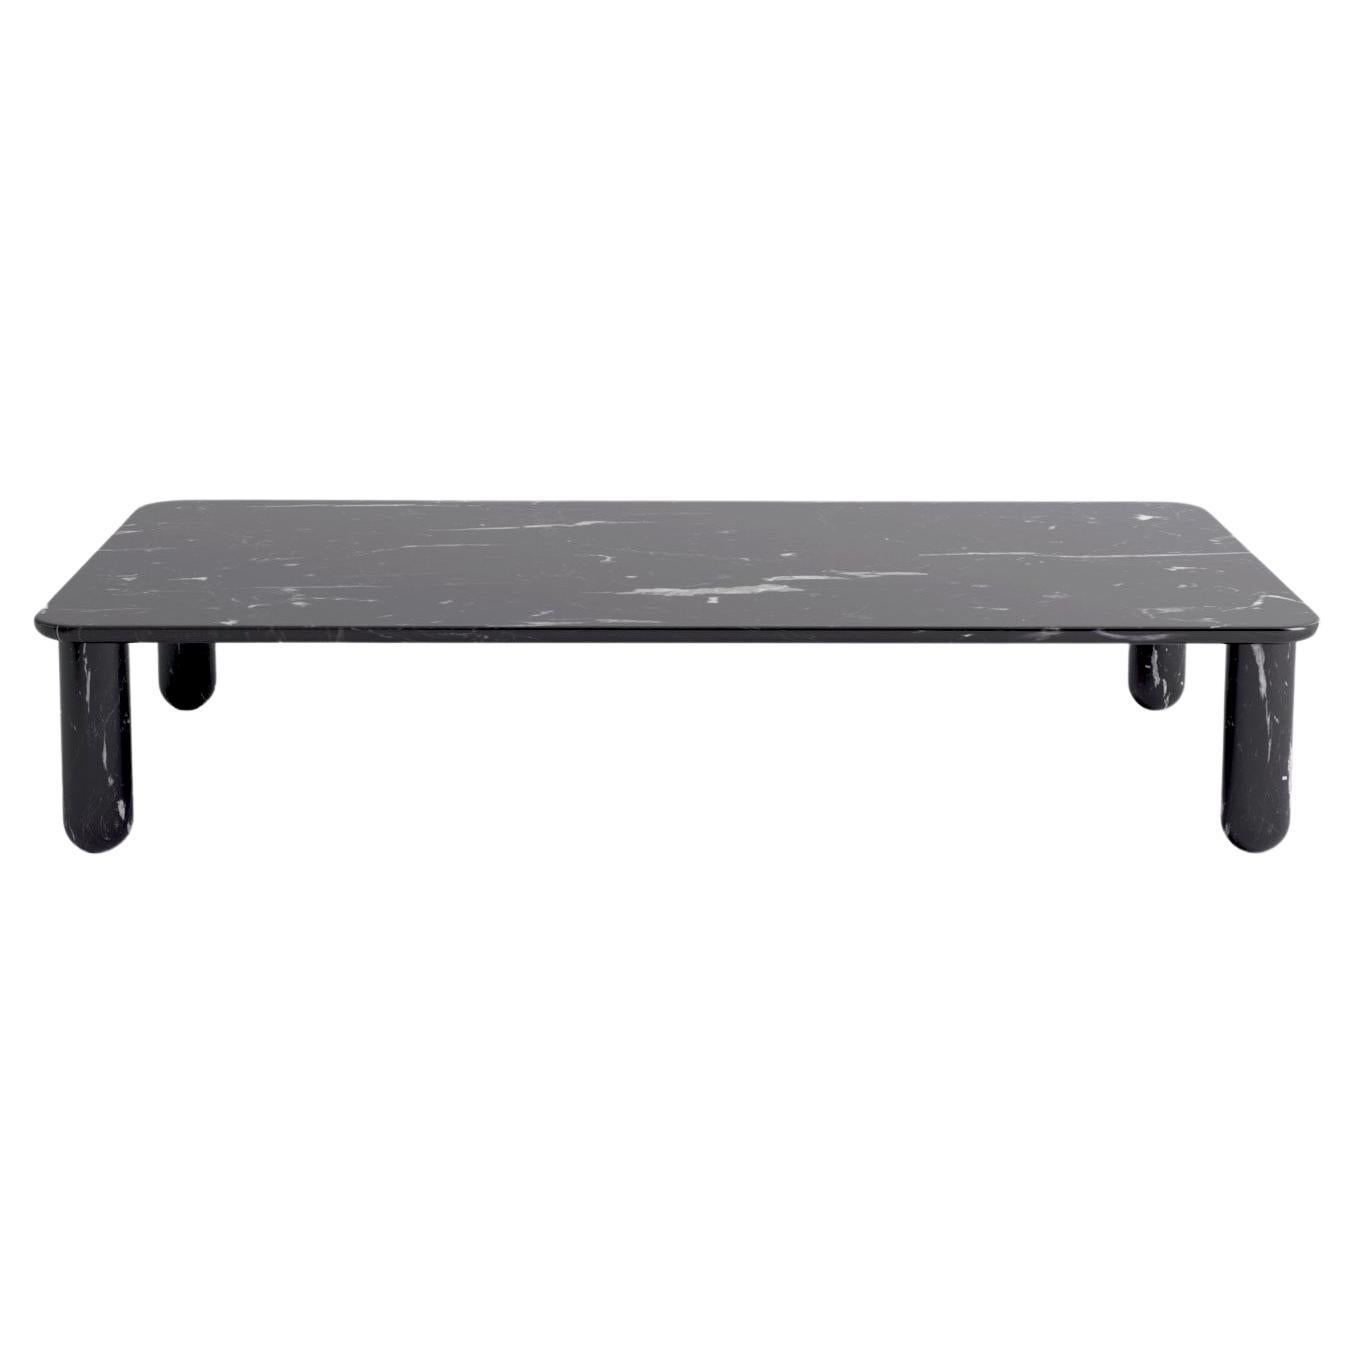 Xlarge Black Marble "Sunday" Coffee Table, Jean-Baptiste Souletie For Sale